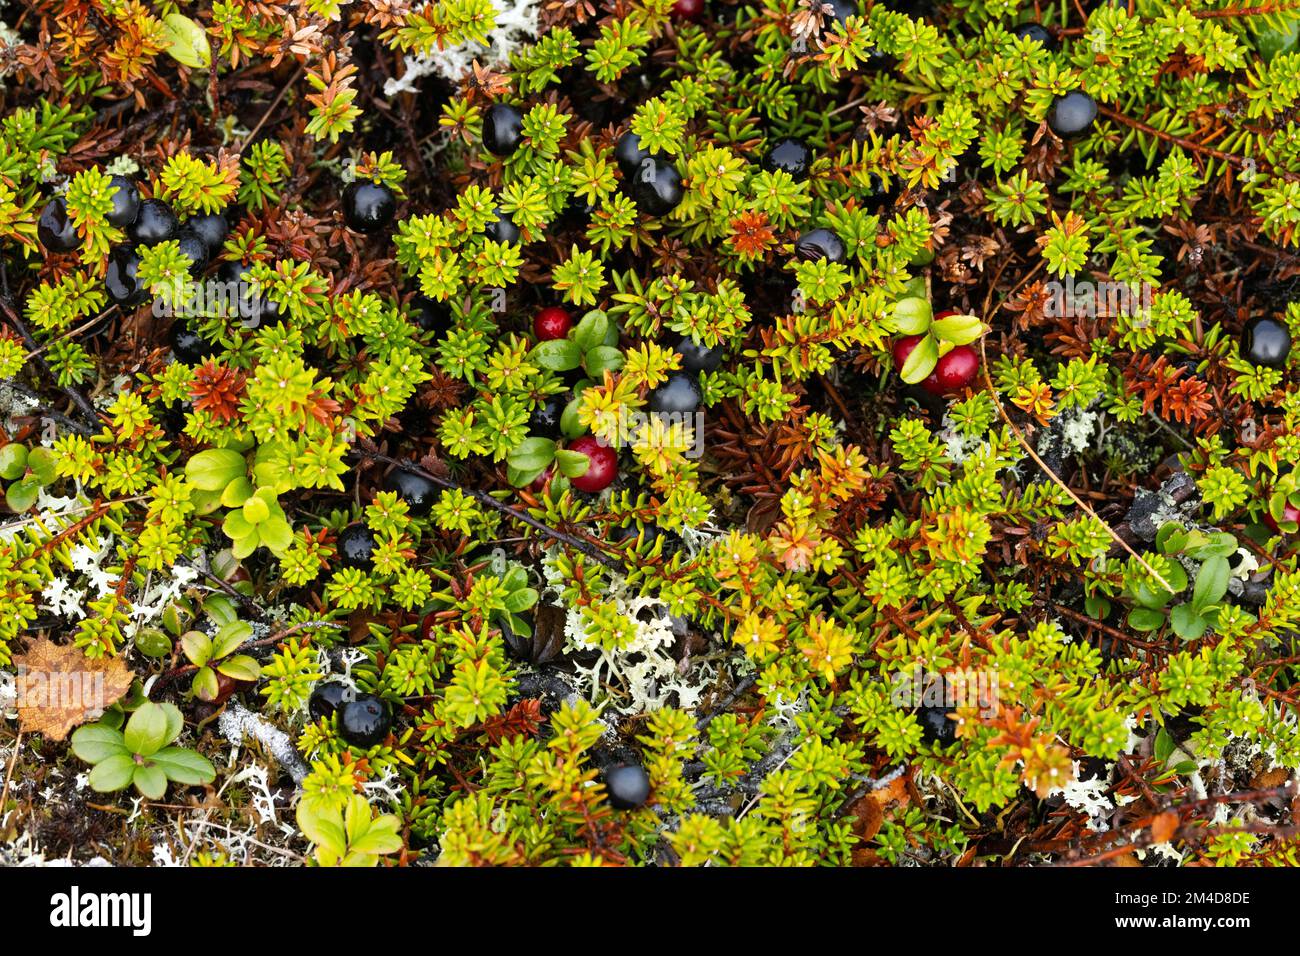 A mixture of ripe Black crowberries and Lingonberries in the middle of low evergreen shrubs in Urho Kekkonen National Park, Northern Finland Stock Photo